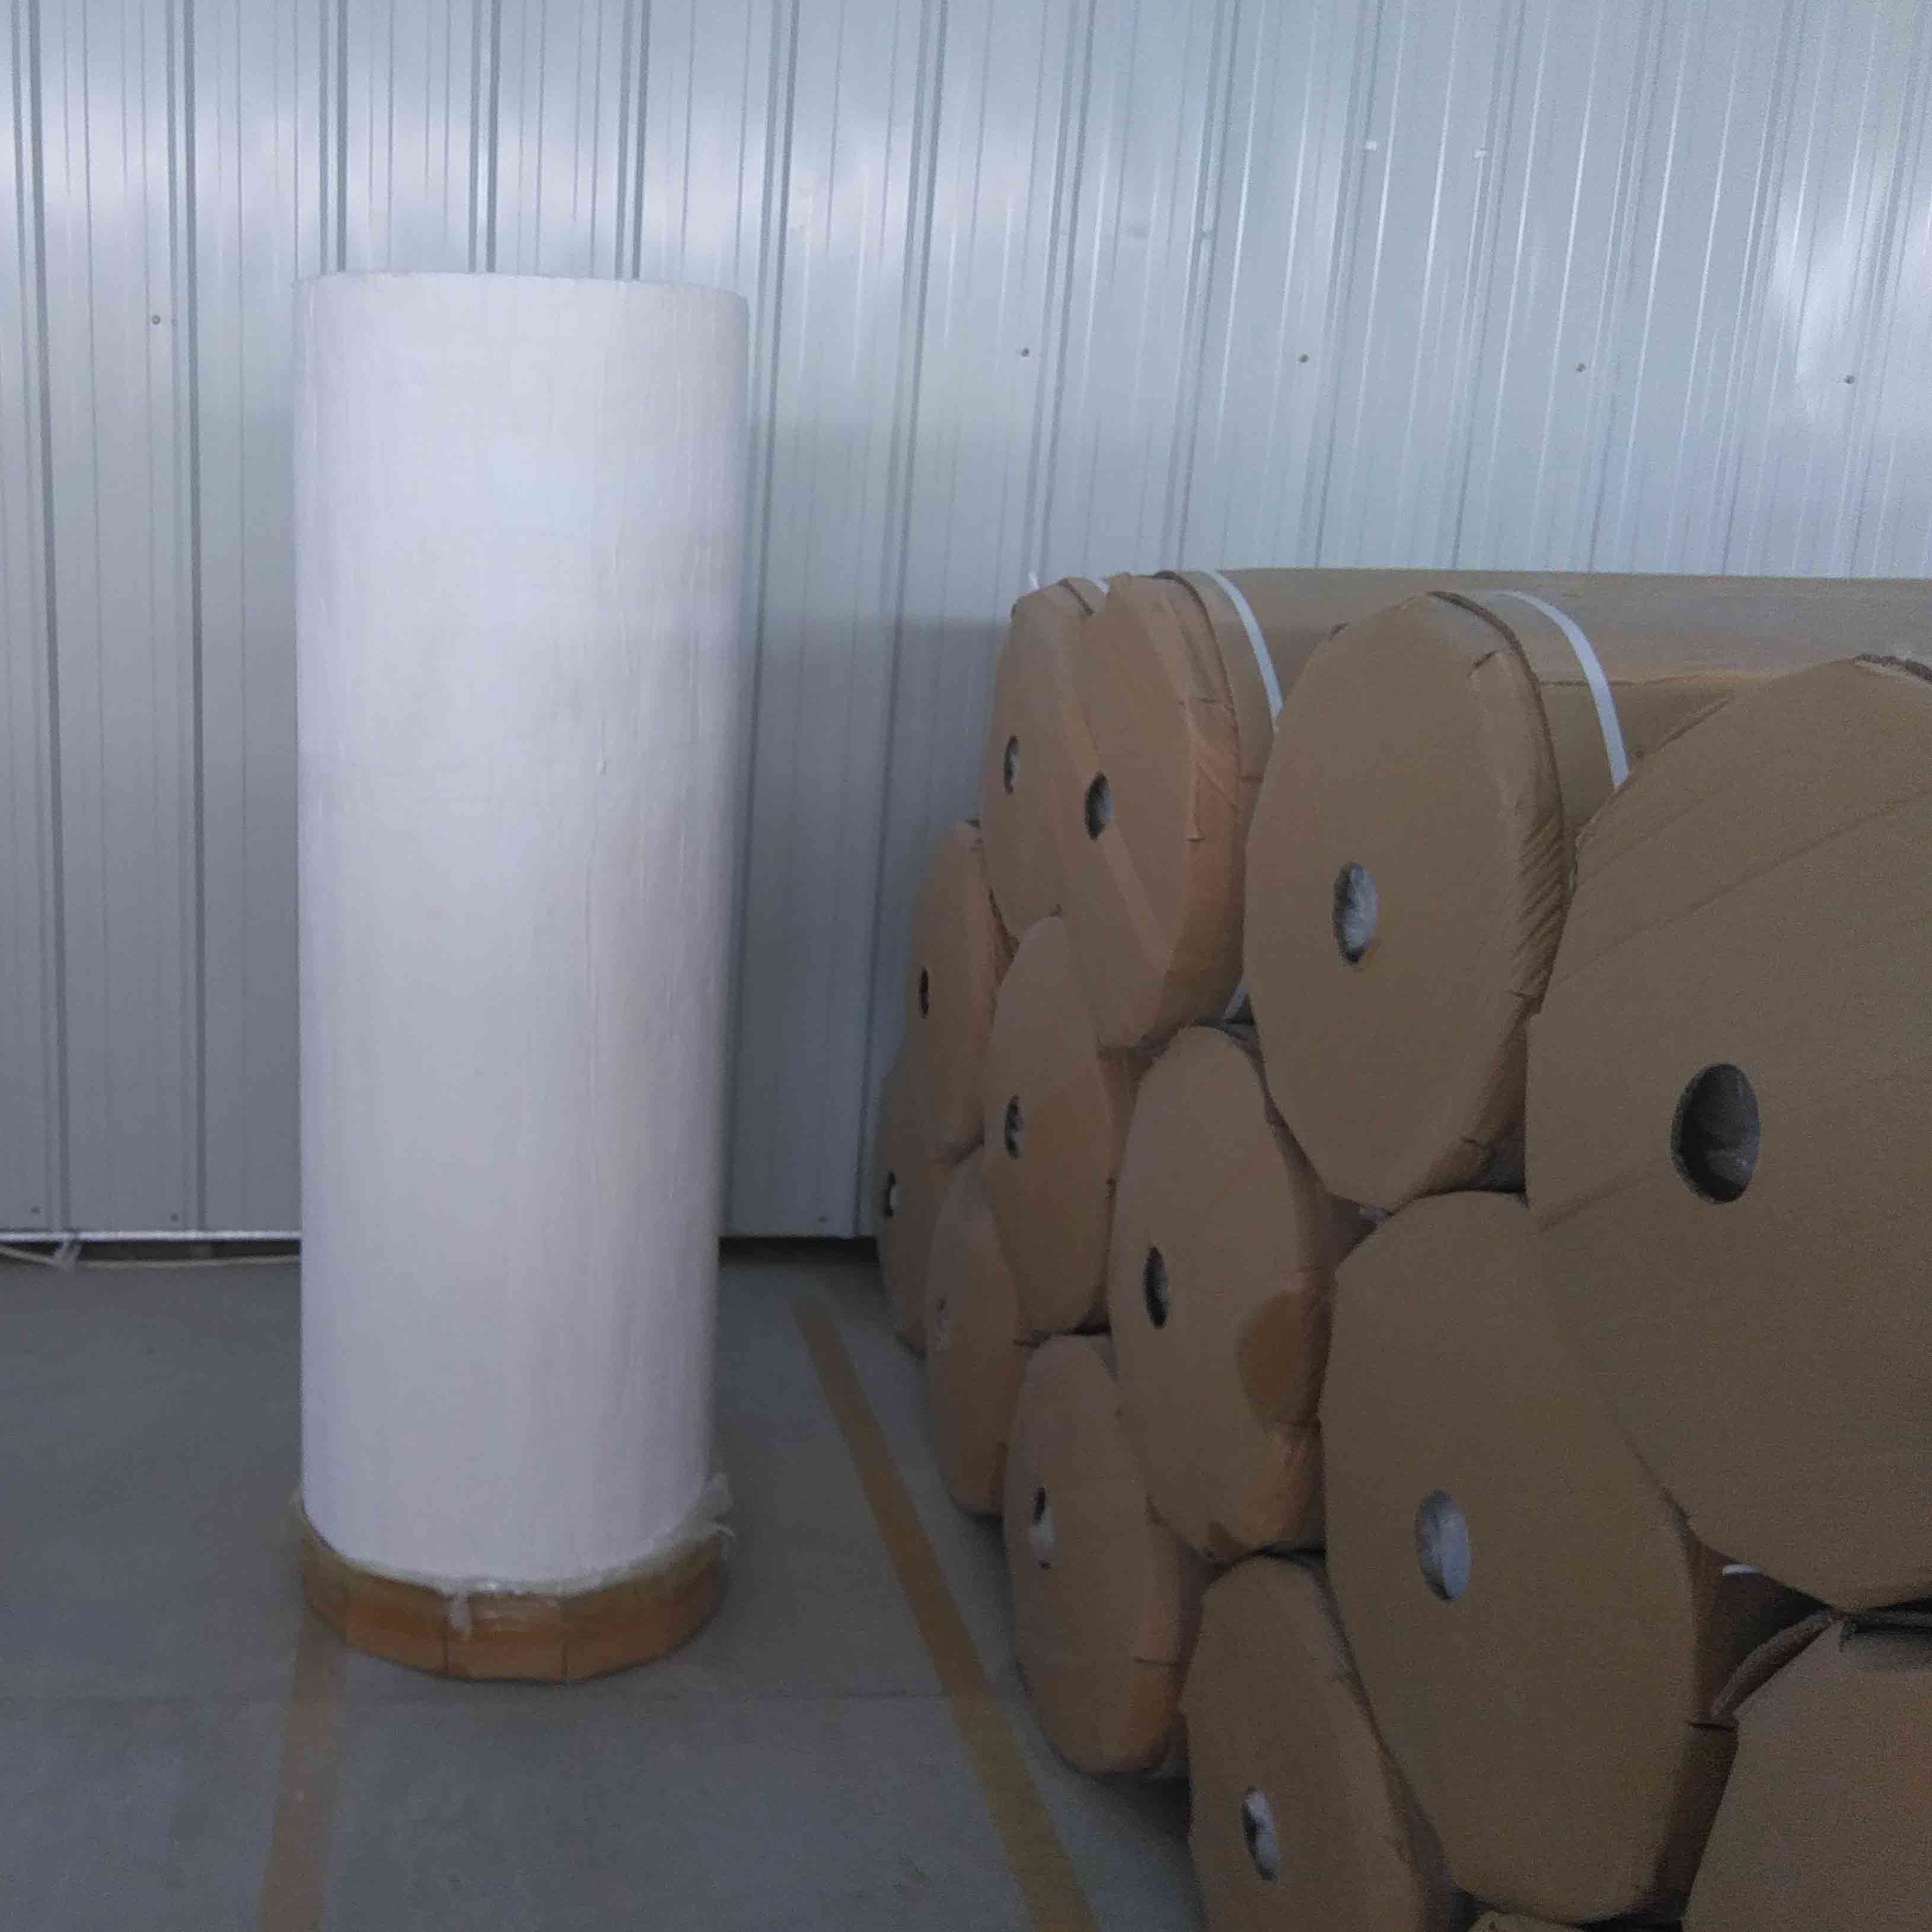 Aspen Aerogel Pipe Insulation Productsfire Protection and Thermal Insulation